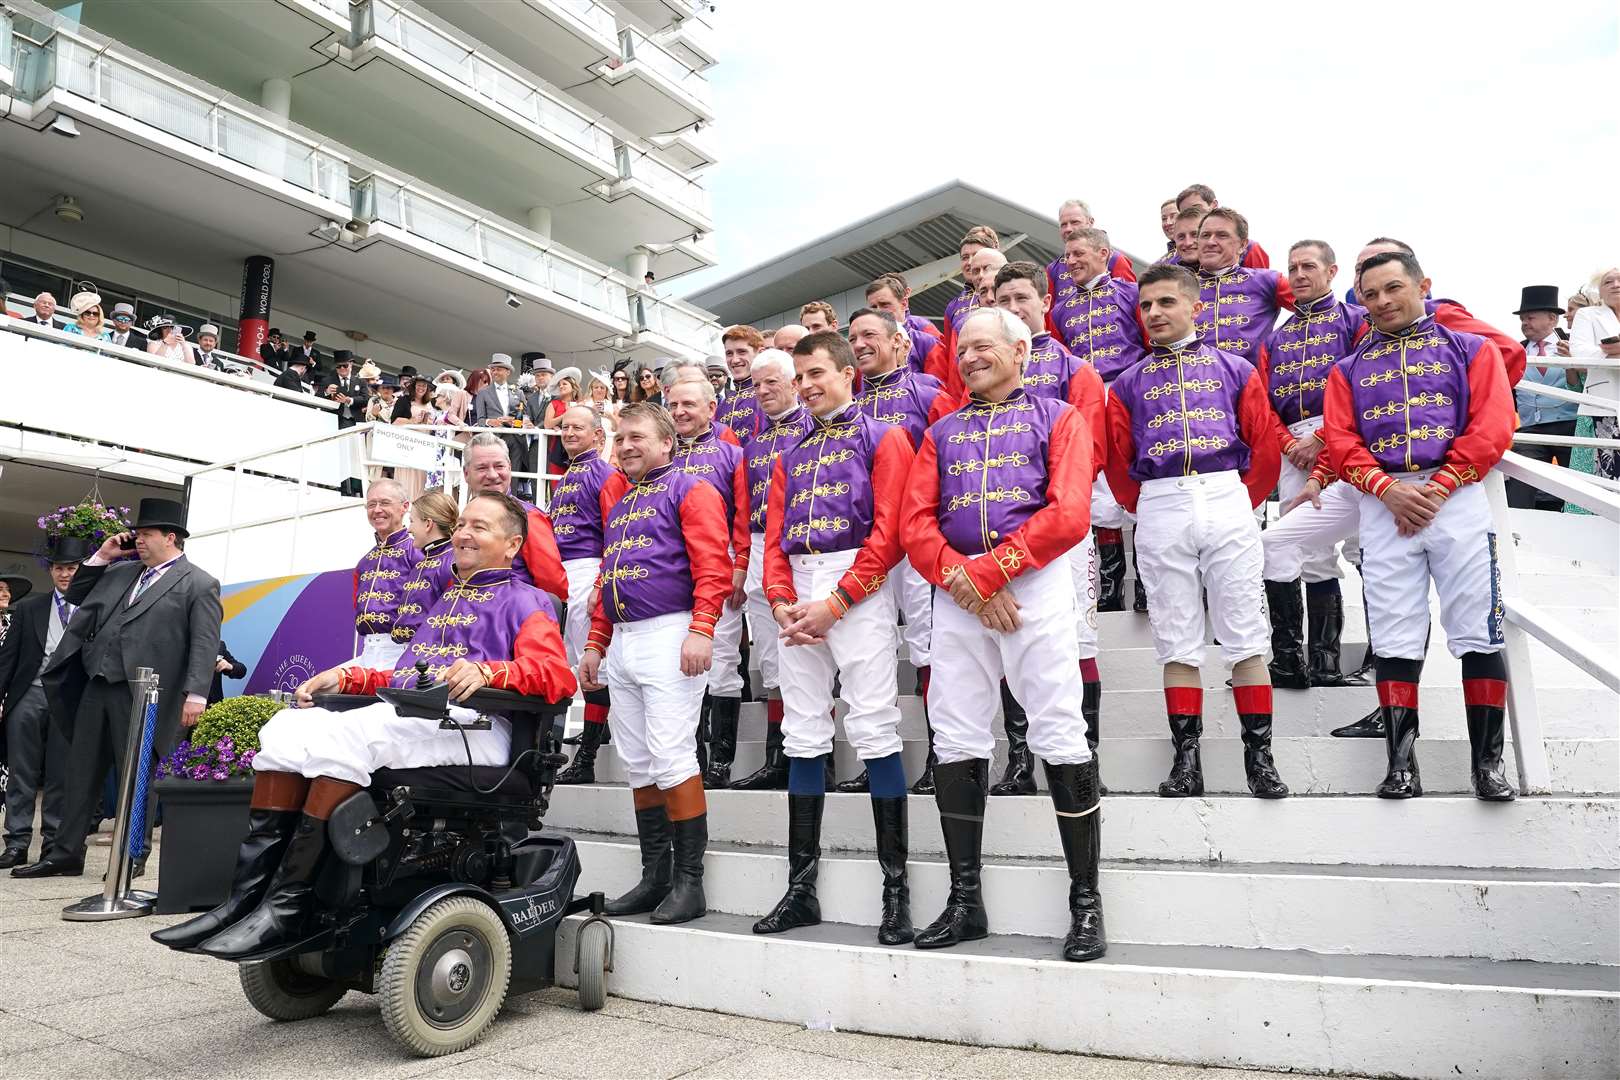 Forty jockeys who have ridden horses for the Queen lined up in her racing colours at Epsom on Derby Day (Tim Goode/PA)